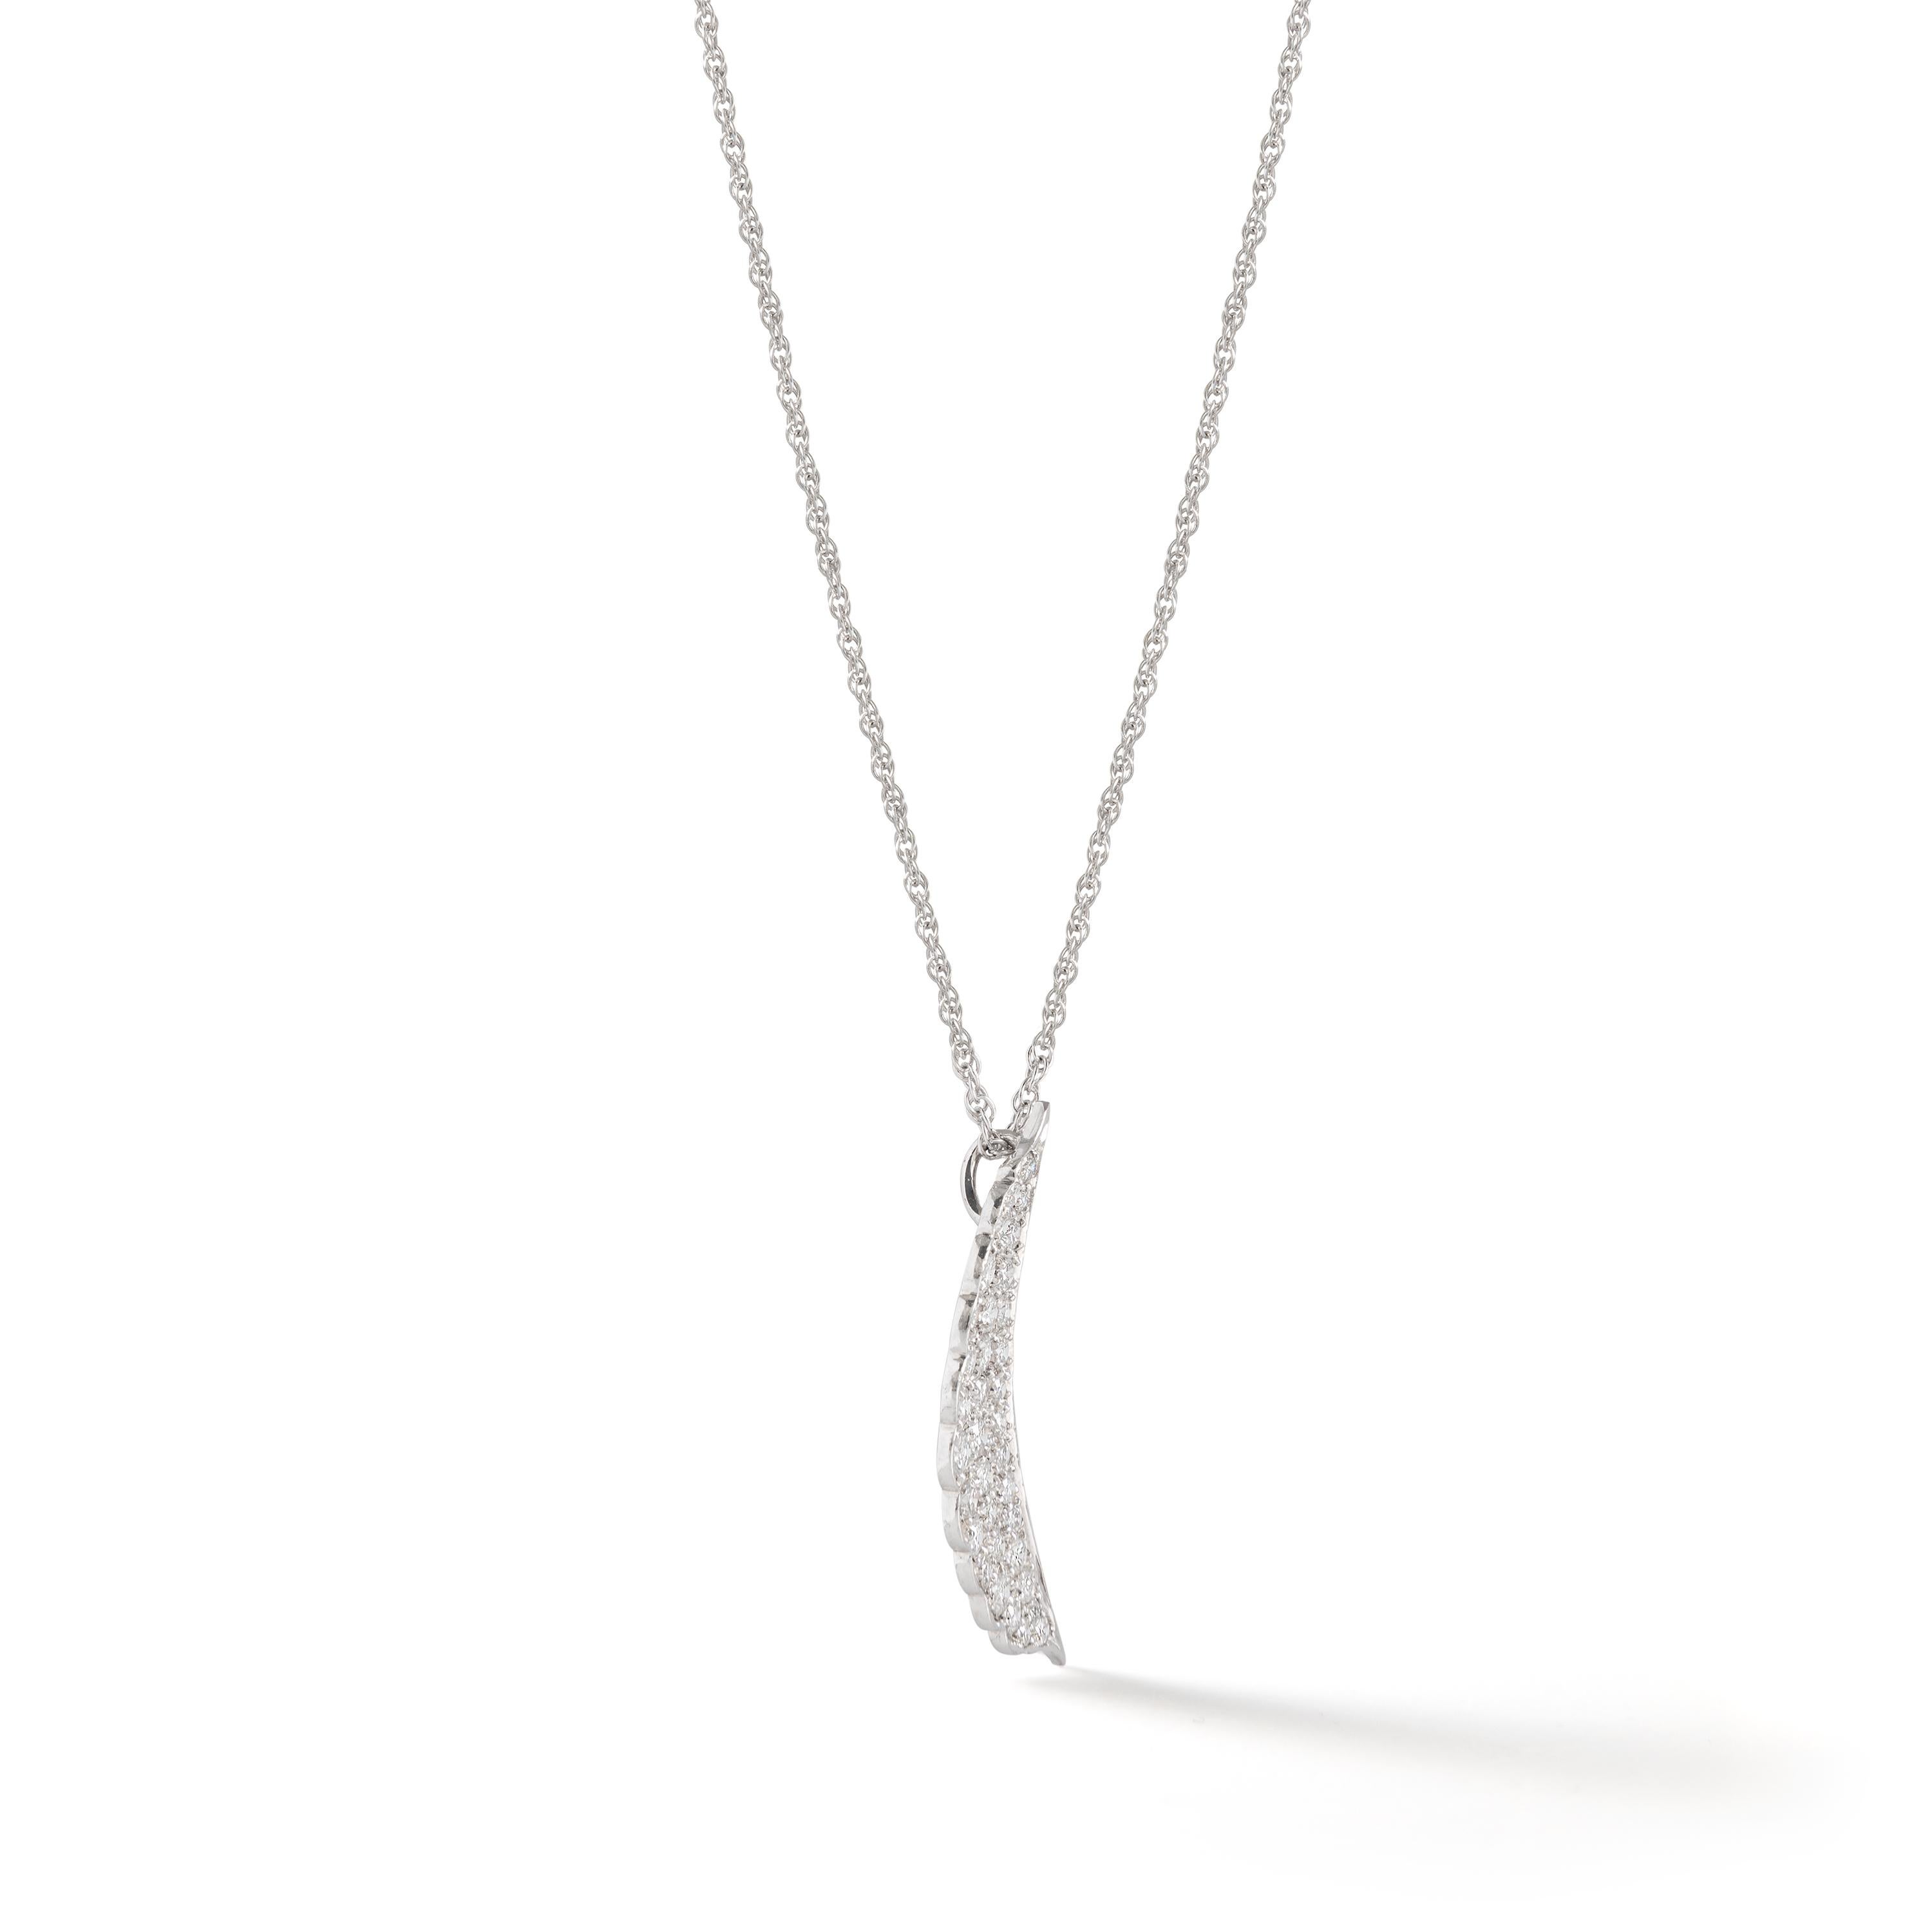 Diamond Platinum Half-Moon Pendant.
Circa 1960.
Pendant's height: 1.18 inch (3.00 centimeters).
Including white gold 18k original chain. 
Length of the chain: 16.54 inches (42.00 centimeters). 